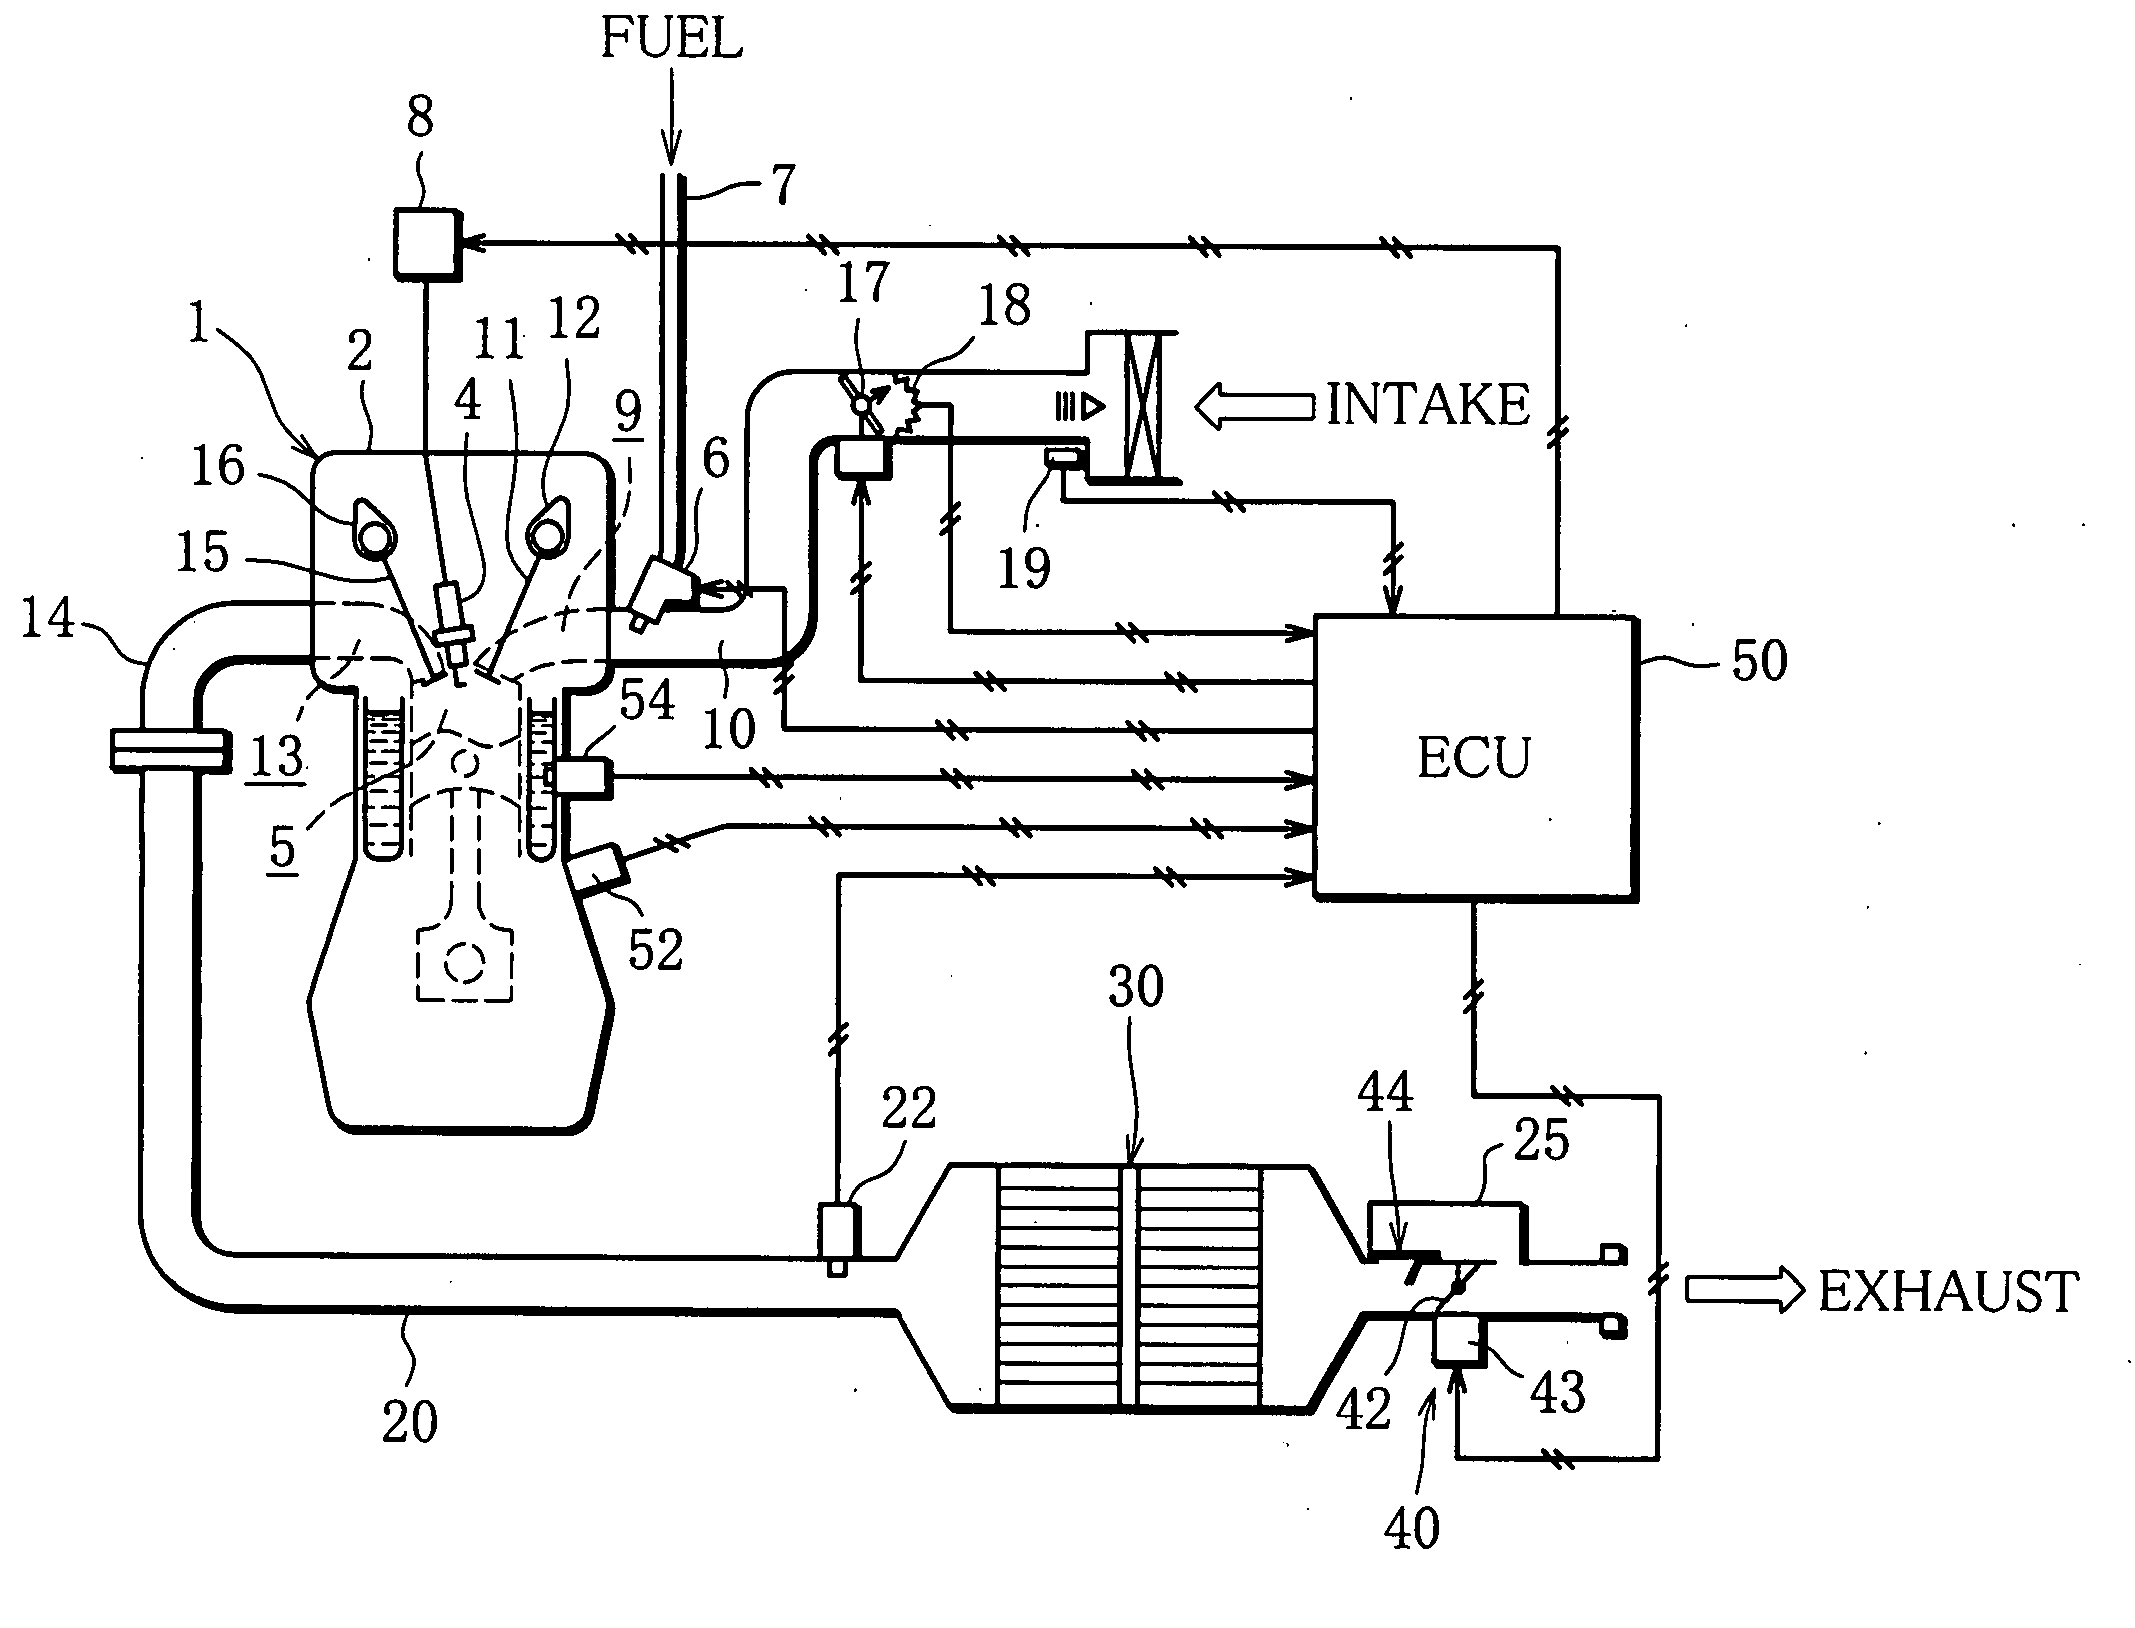 Exhaust pressure-raising device for an internal combustion engine